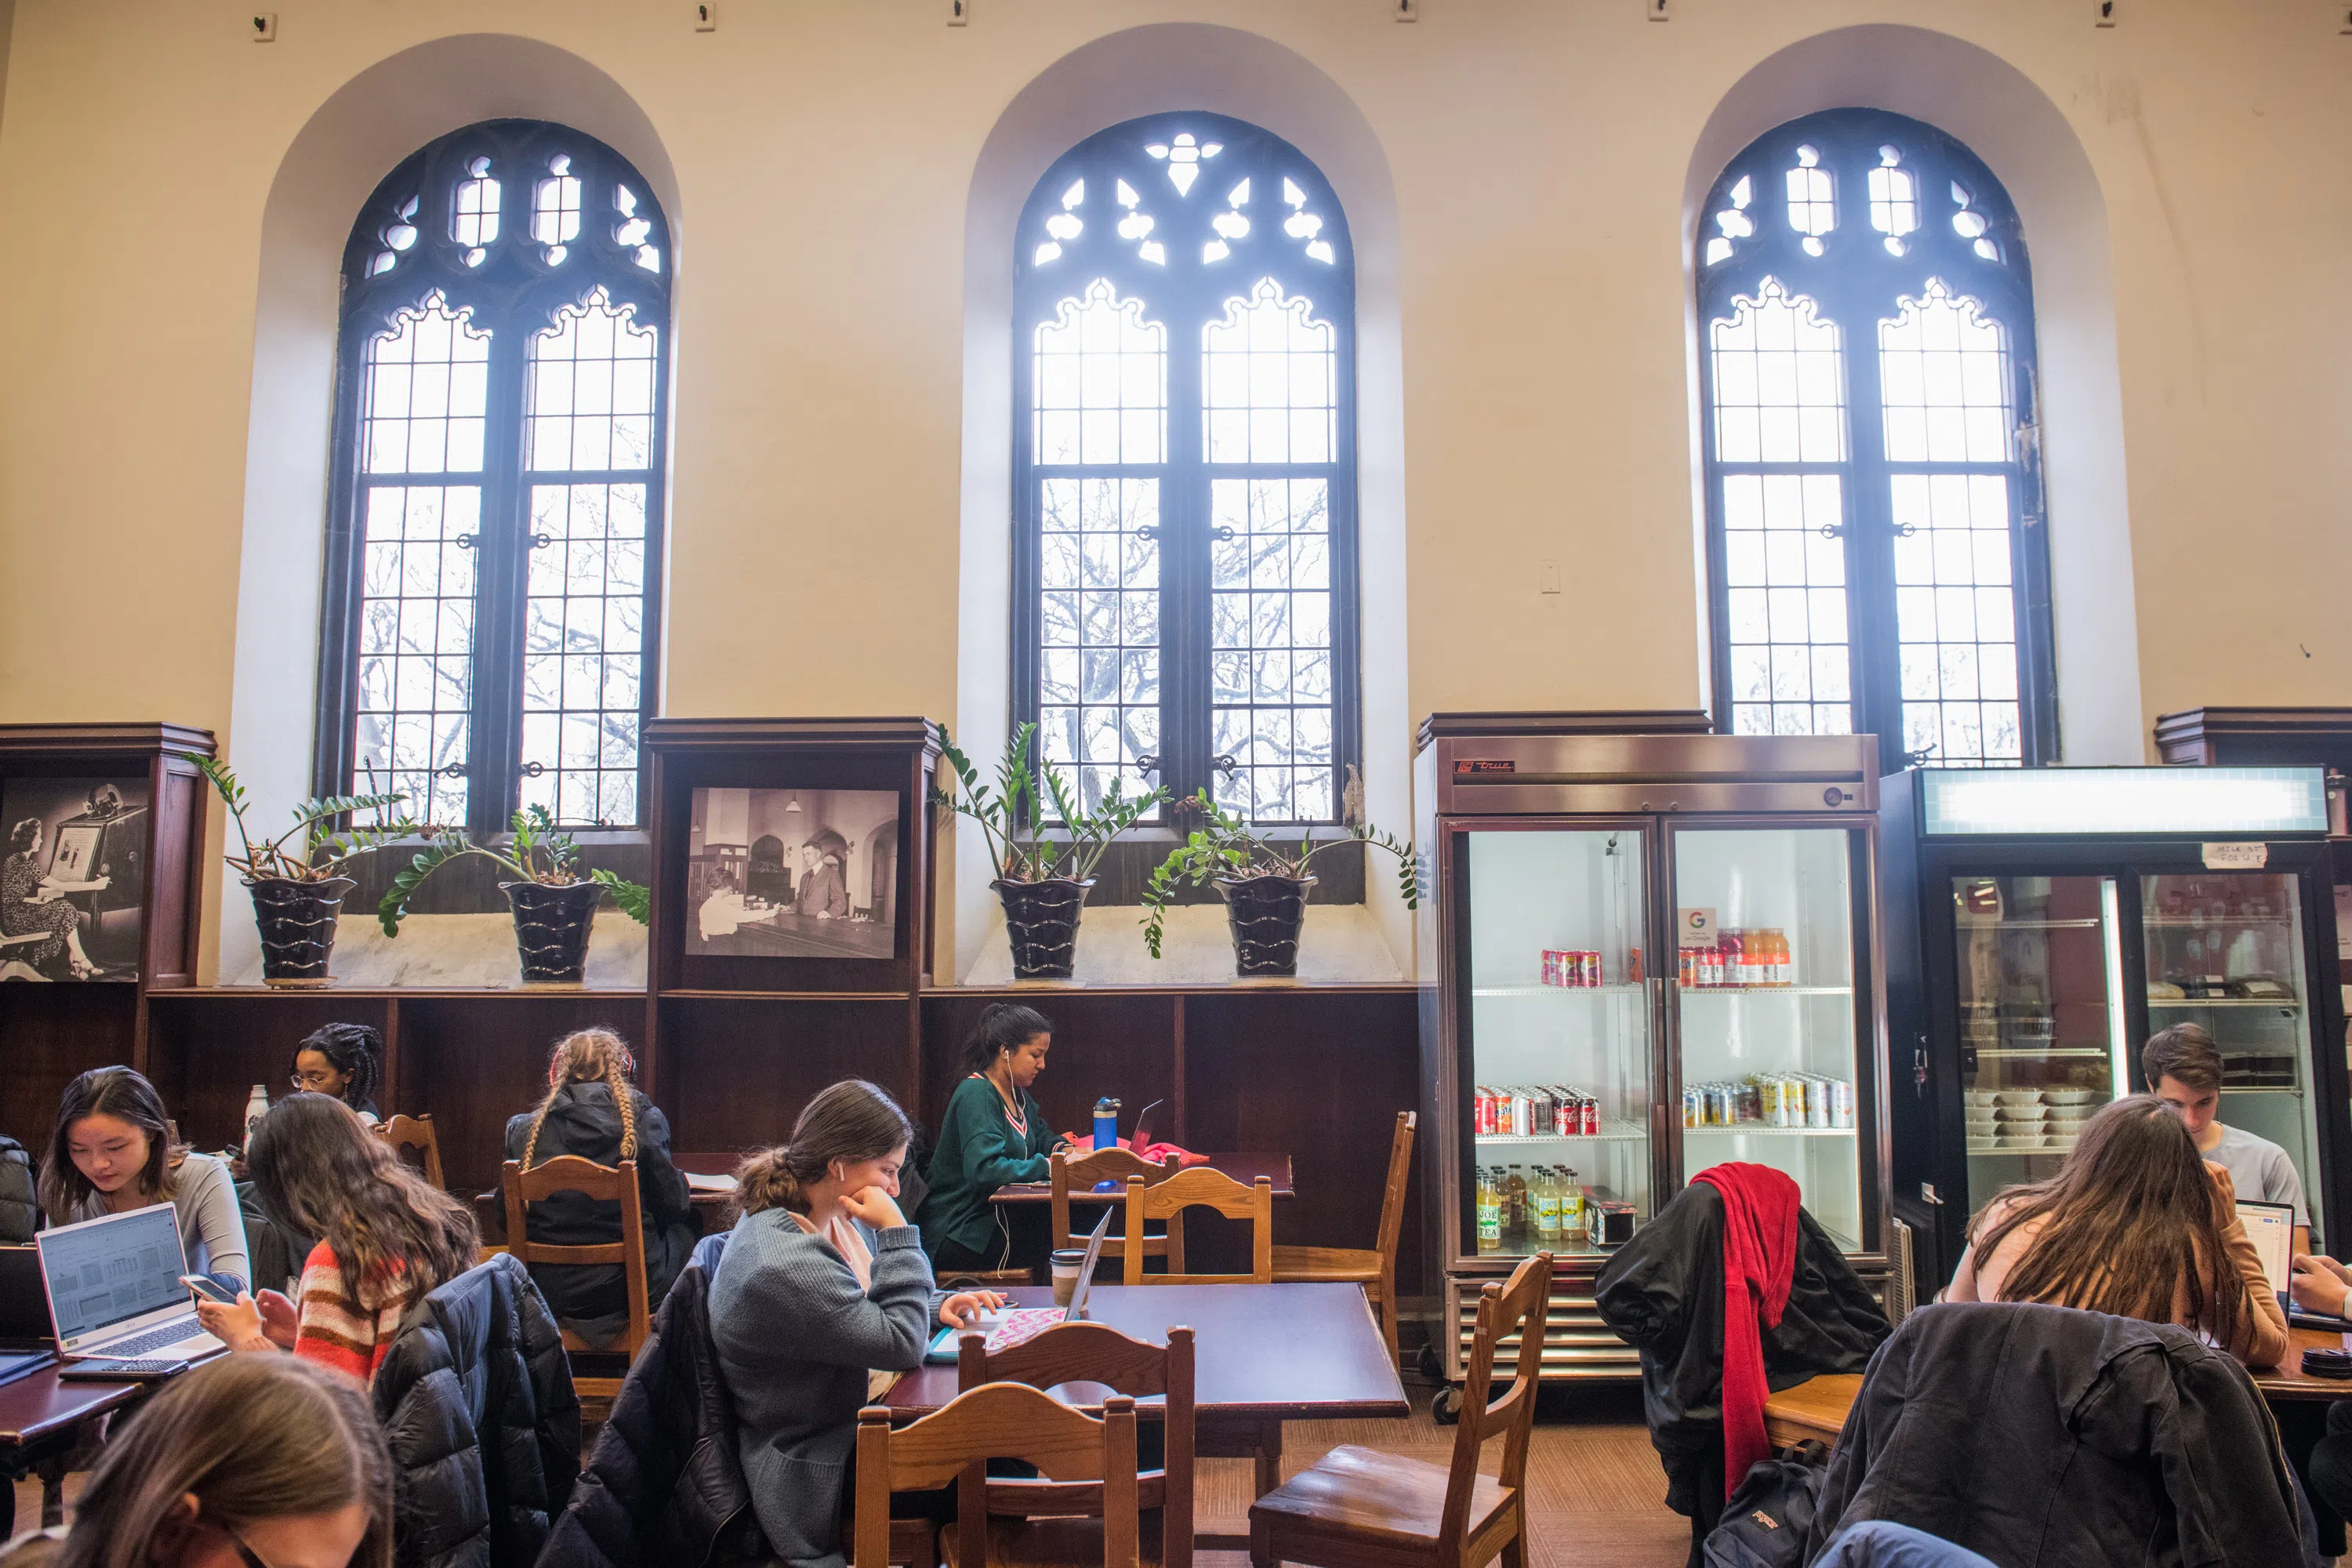 Students sit at tables at a cafe. Large gothic windows let in light. Vending machines are stocked with soft drinks.